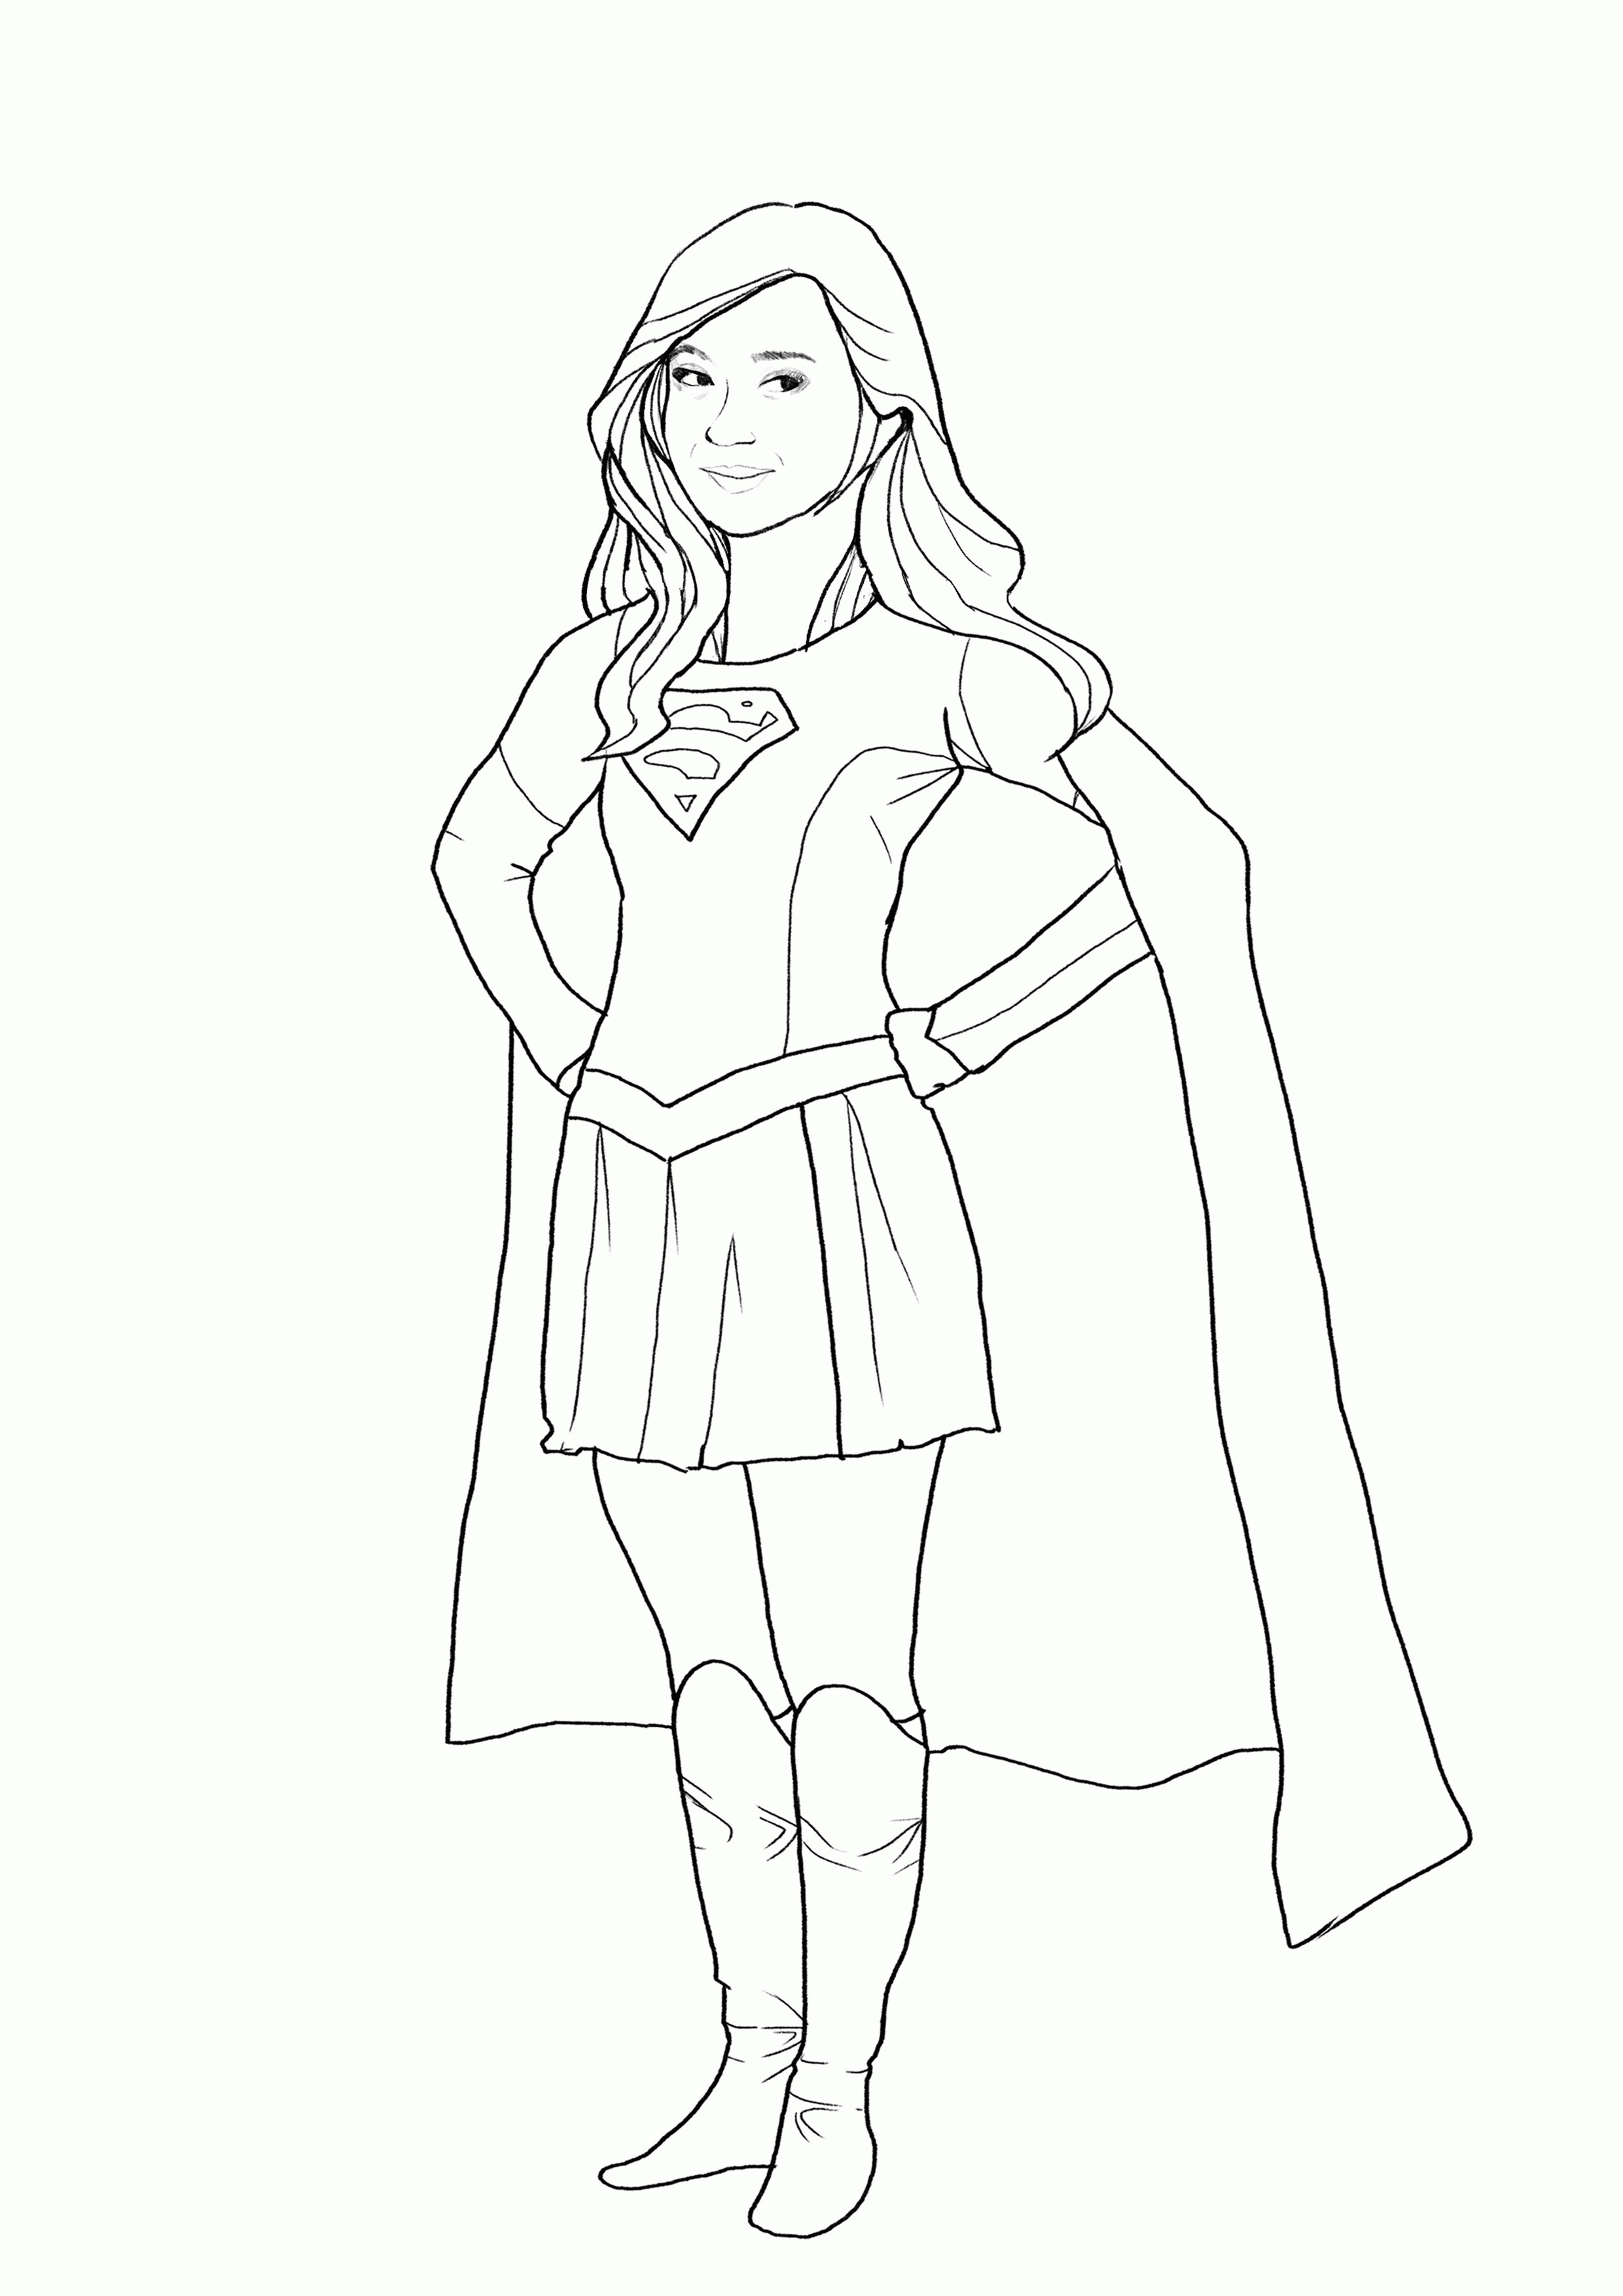 Free Supergirl Coloring Pages
 Free Supergirl Coloring Pages AZ Coloring Pages